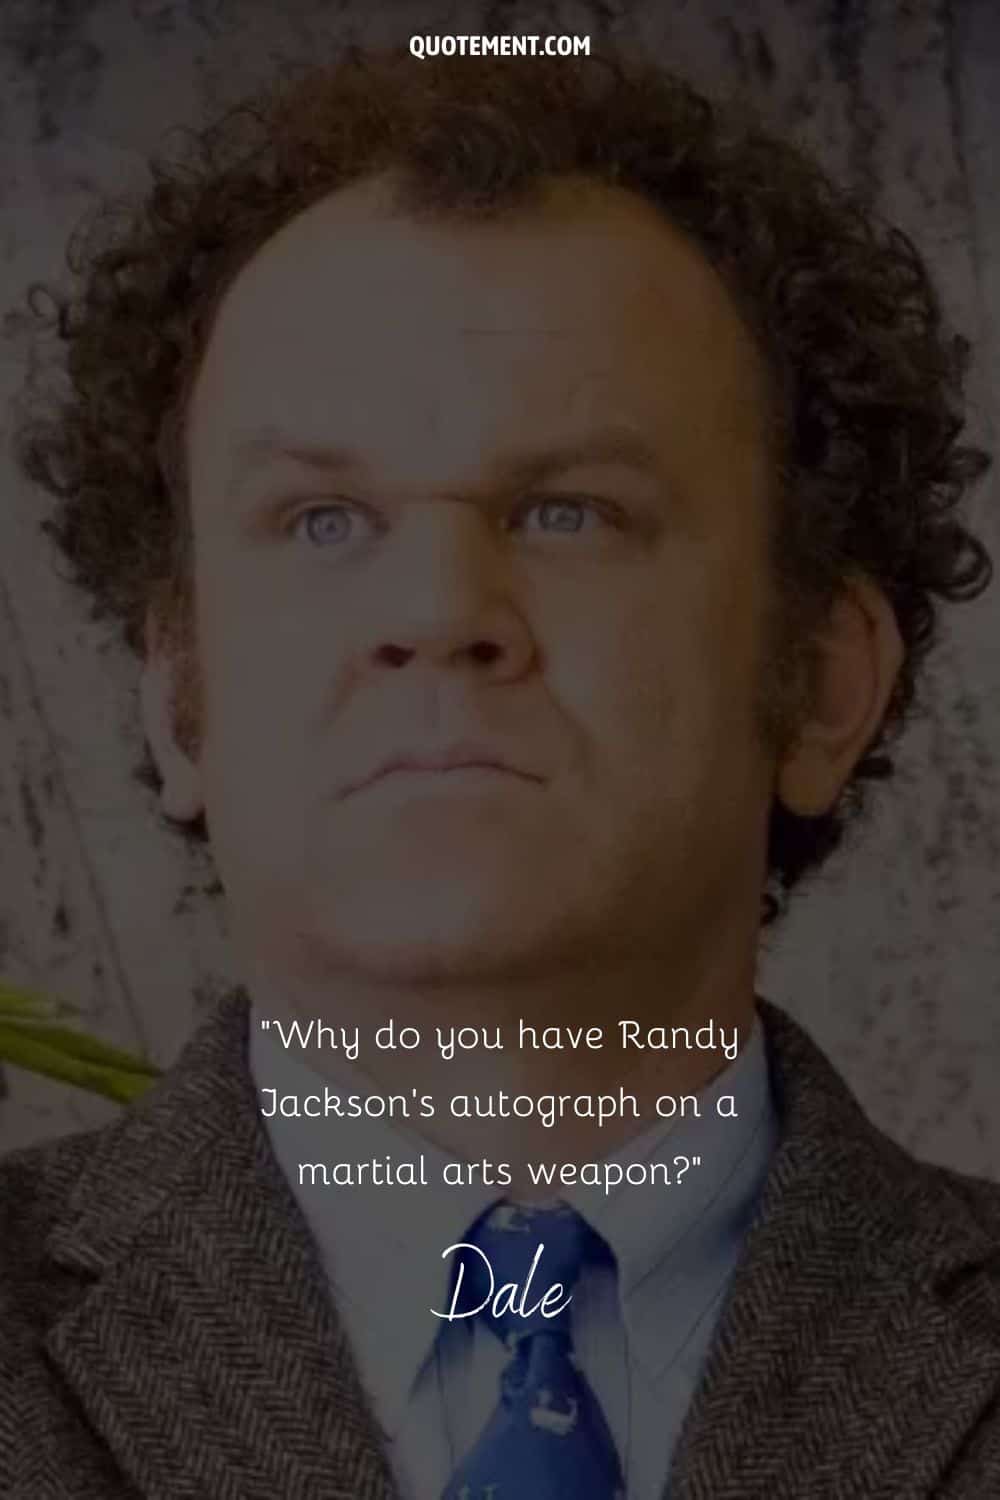 Why do you have Randy Jackson’s autograph on a martial arts weapon